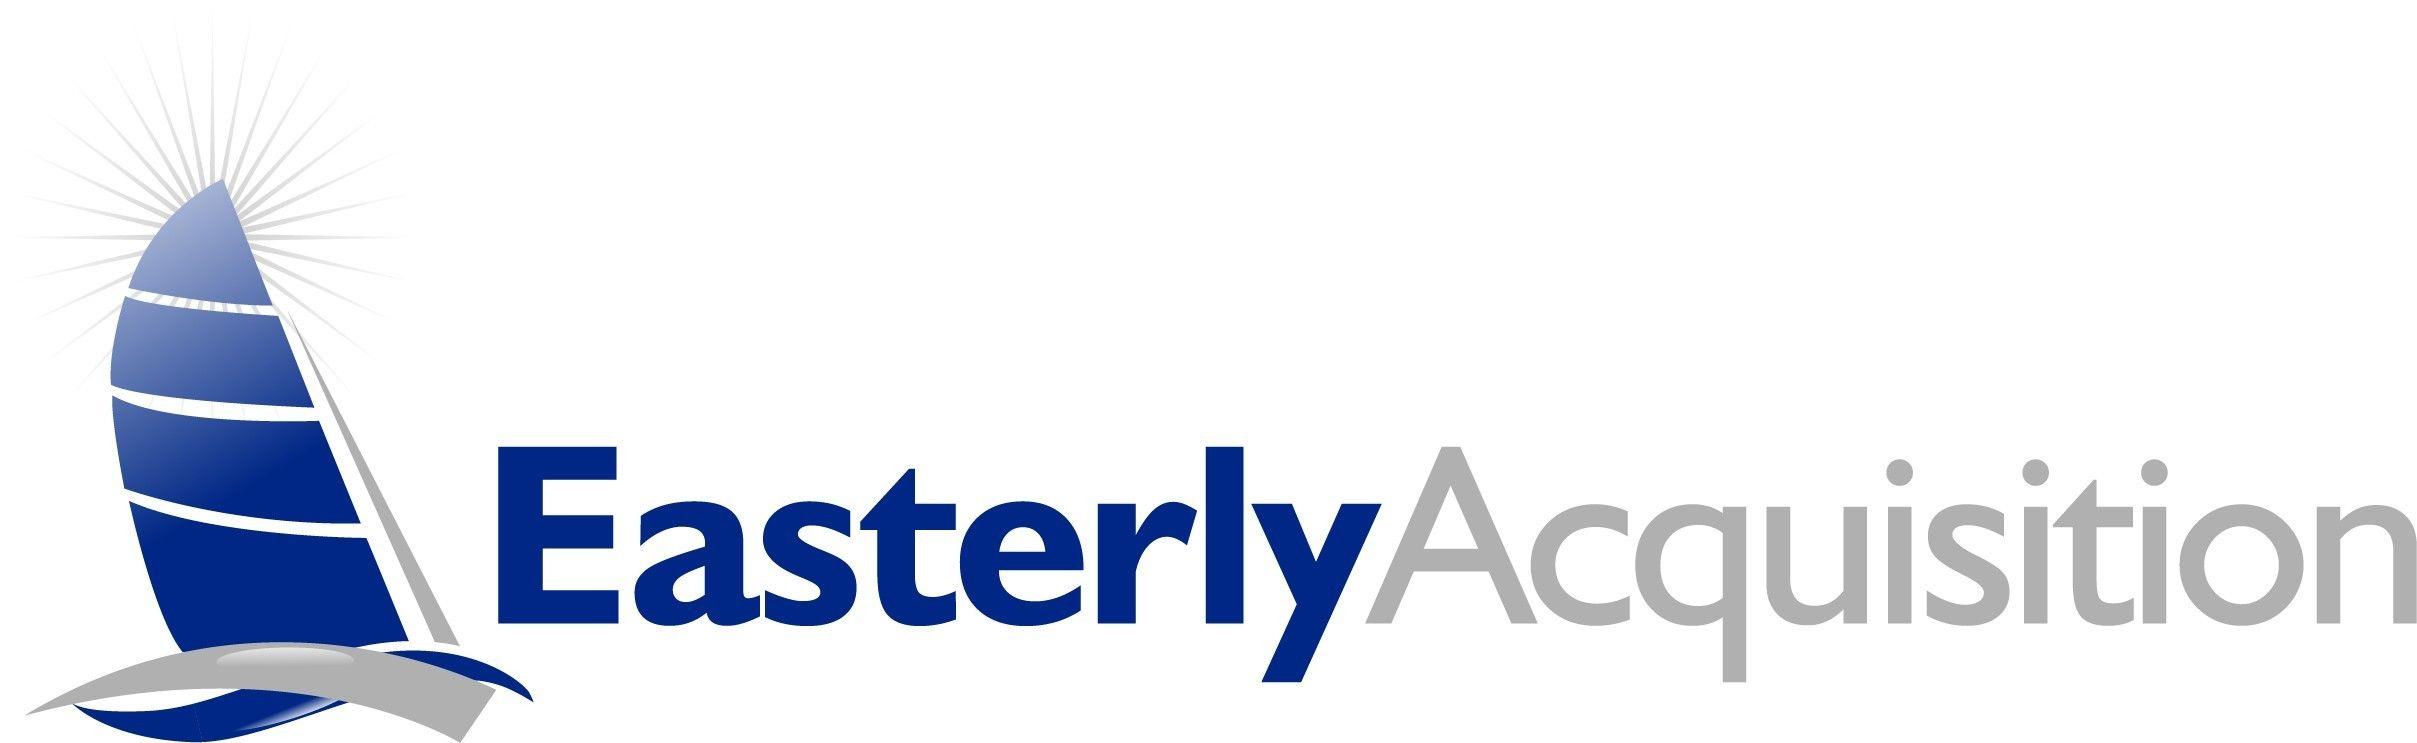 Acquisition Logo - Easterly Acquisition Corp. and JH Capital Announce Contribution to